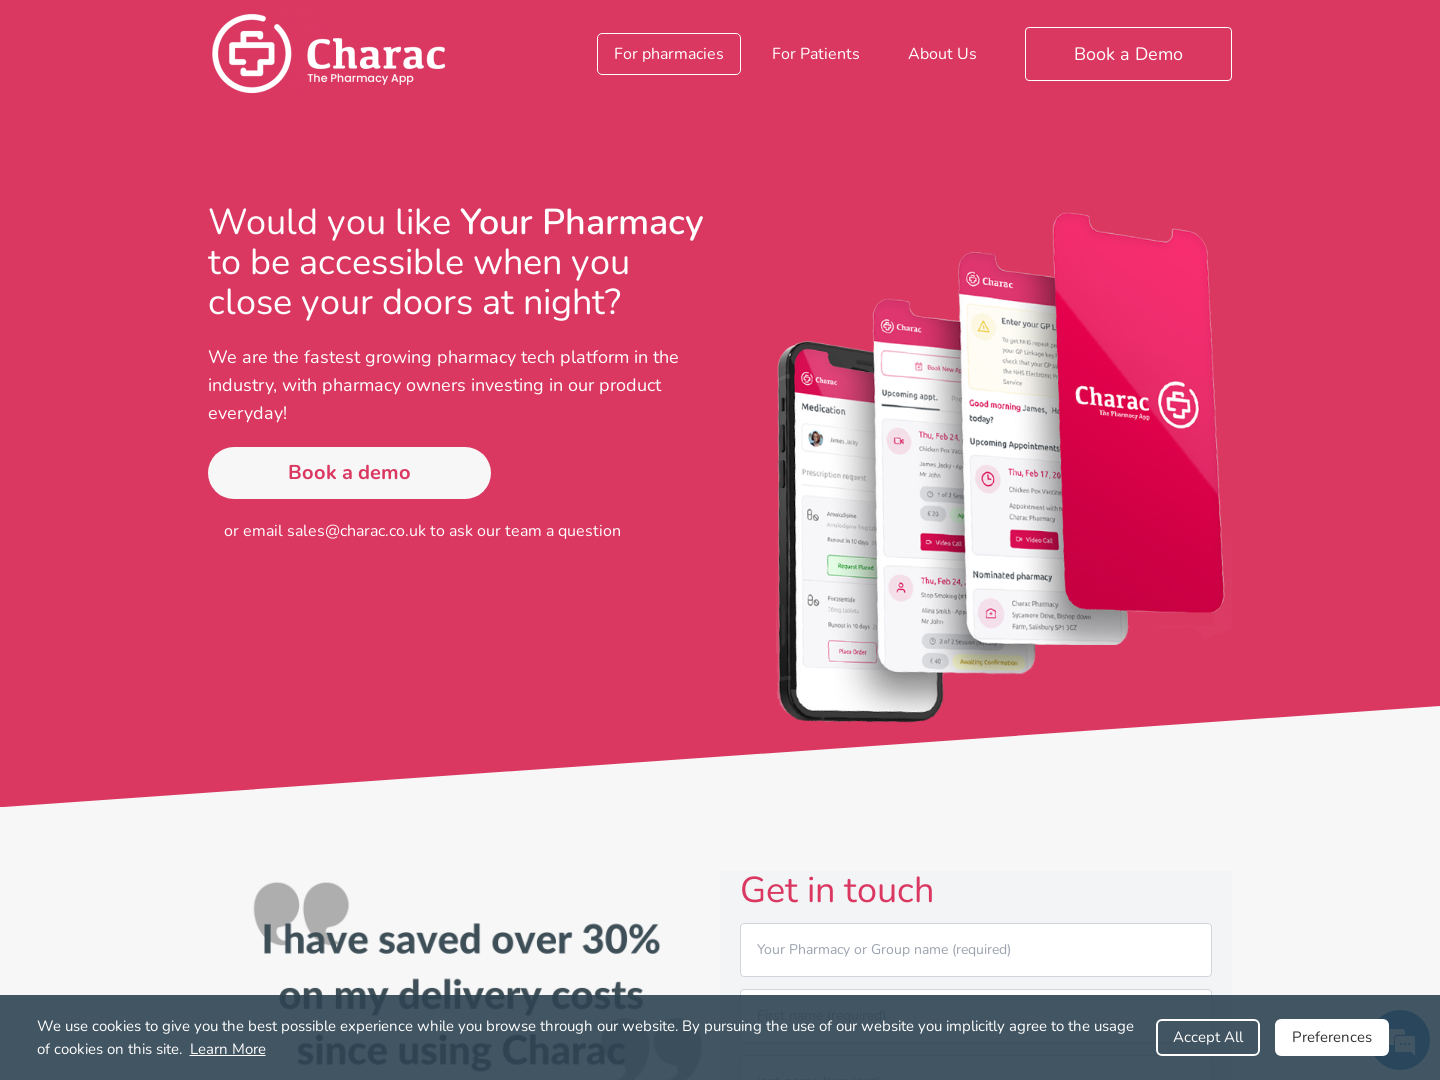 "Charac Receives £1.2 Million Boost to Transform Pharmacy Sector"